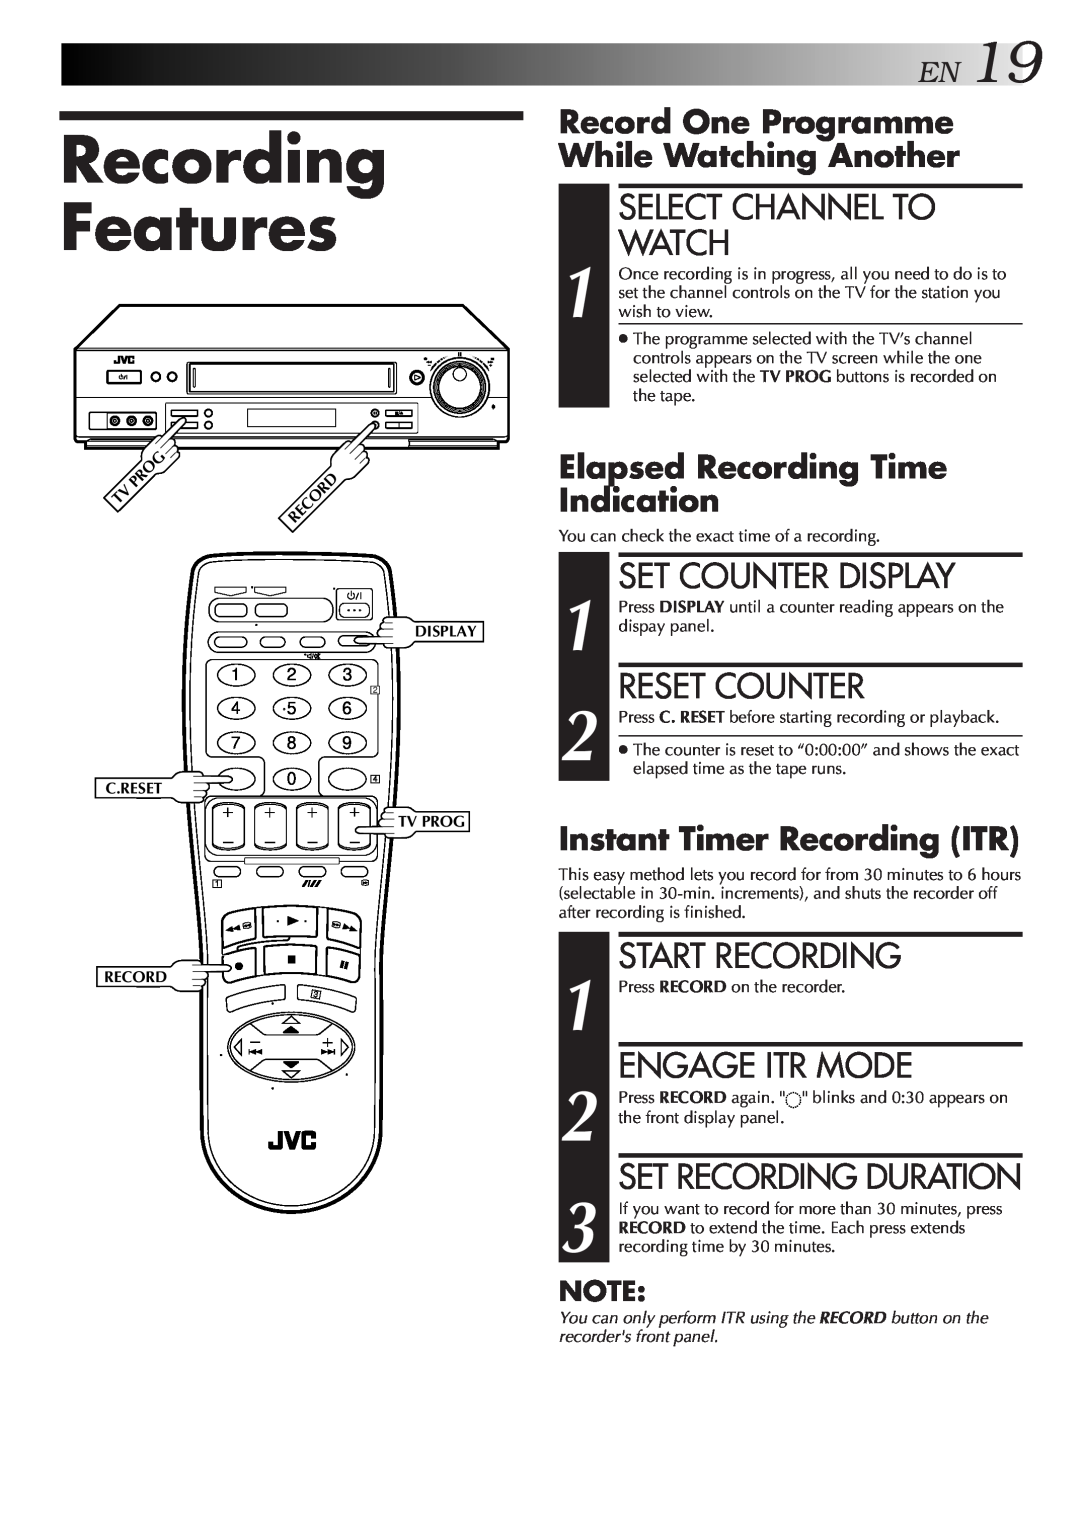 JVC HR-DD857MS Recording Features, EN19, Select Channel To Watch, Set Counter Display, Reset Counter, Engage Itr Mode 